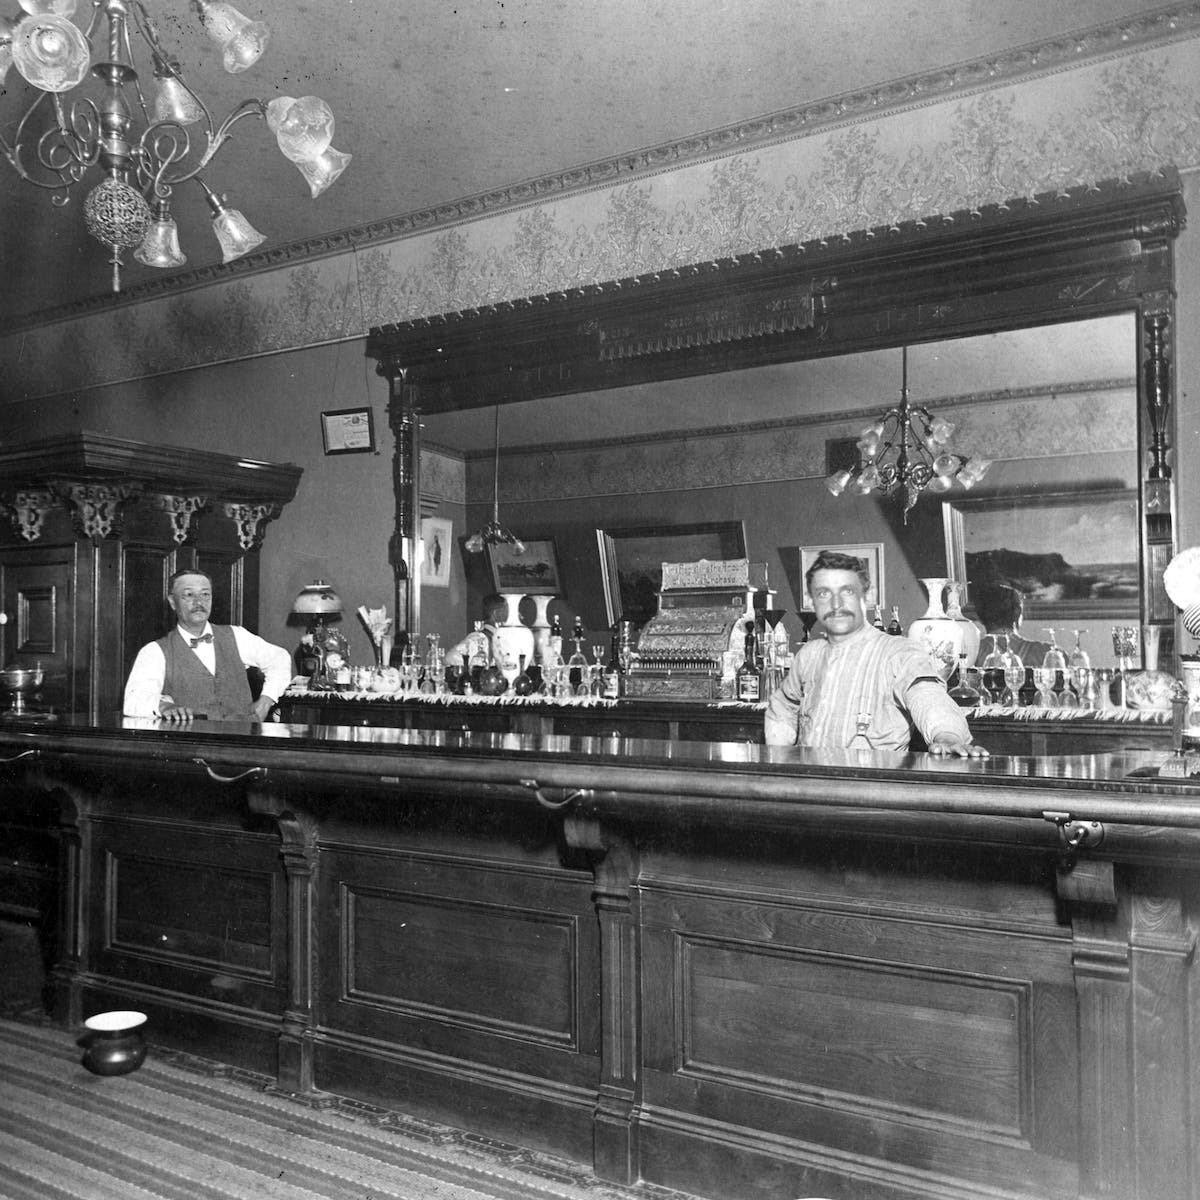 Was Moorhead once a drinking destination?